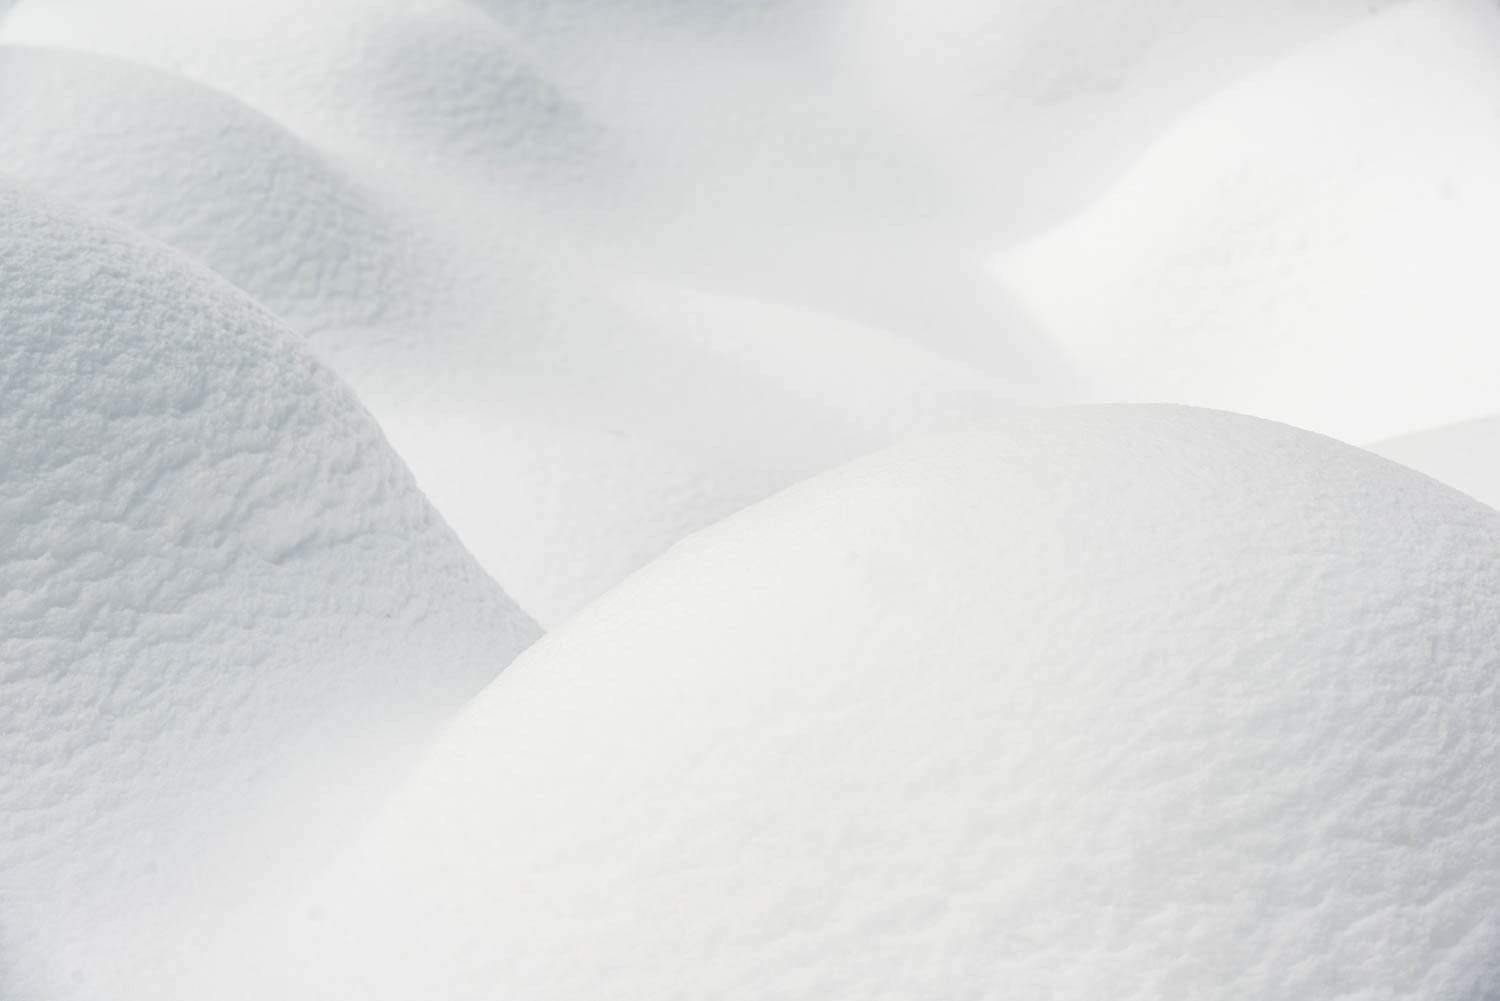 A sequence of large snow mounds, Snow Bumps